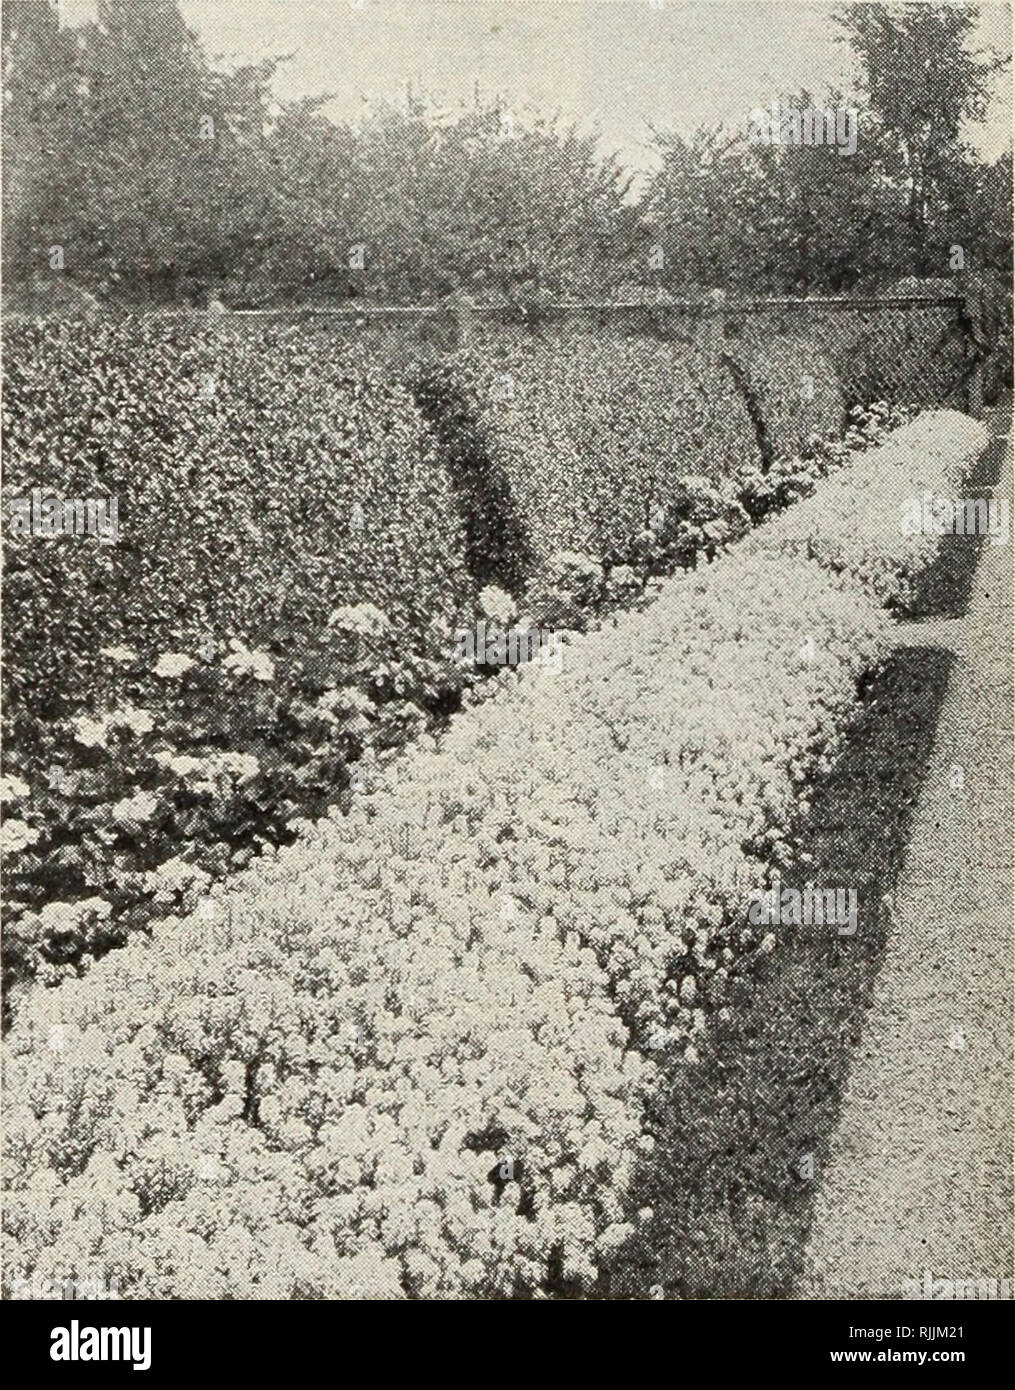 . Beckert seed &amp; bulb company : 1927. Nurseries (Horticulture) Pennsylvania Pittsburgh Catalogs; Nursery stock Pennsylvania Pittsburgh Catalogs; Flowers Seeds Pennsylvania Pittsburgh Catalogs; Bulbs (Plants) Pennsylvania Pittsburgh Catalogs; Gardening Pennsylvania Pittsburgh Equipment and supplies Catalogs. Achillea, The Pearl. 500 ABRONIA uinbellata (Sand Verbena). PH. Pretty trailing plants bearing fra- grant, rosy lilac, verbena-like flower heads. Use for rock gardens or hanging baskets. Pkt., 10c. 510 ABUTILON, Choice Hybrids (Flowering Maple). PT. Everblooming greenhouse shrubs with d Stock Photo